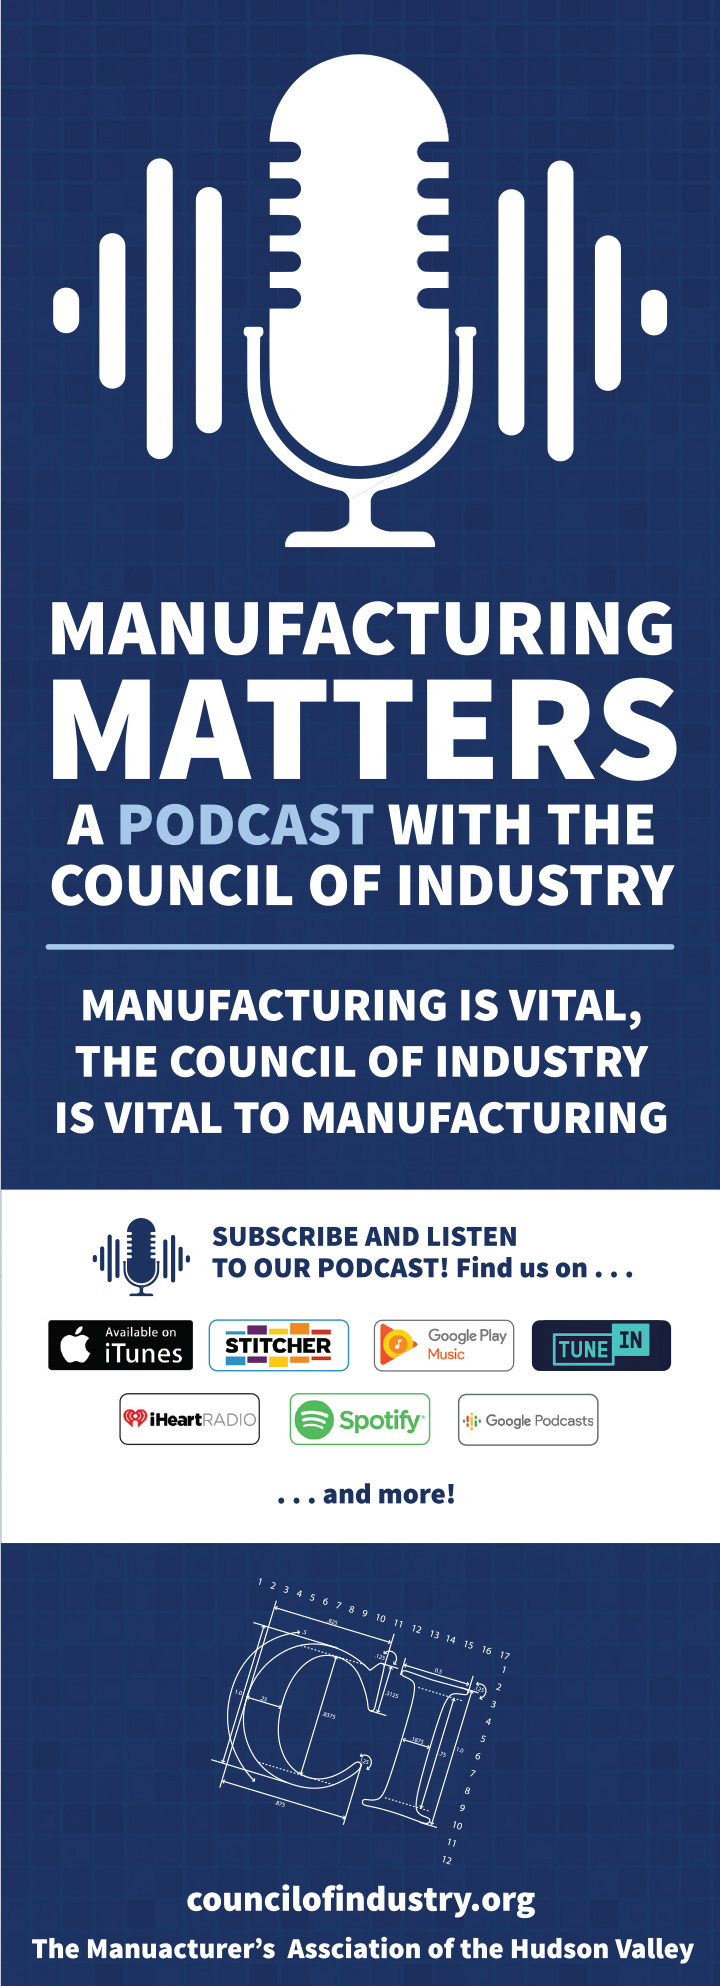 Learn more about the CI Podcasts